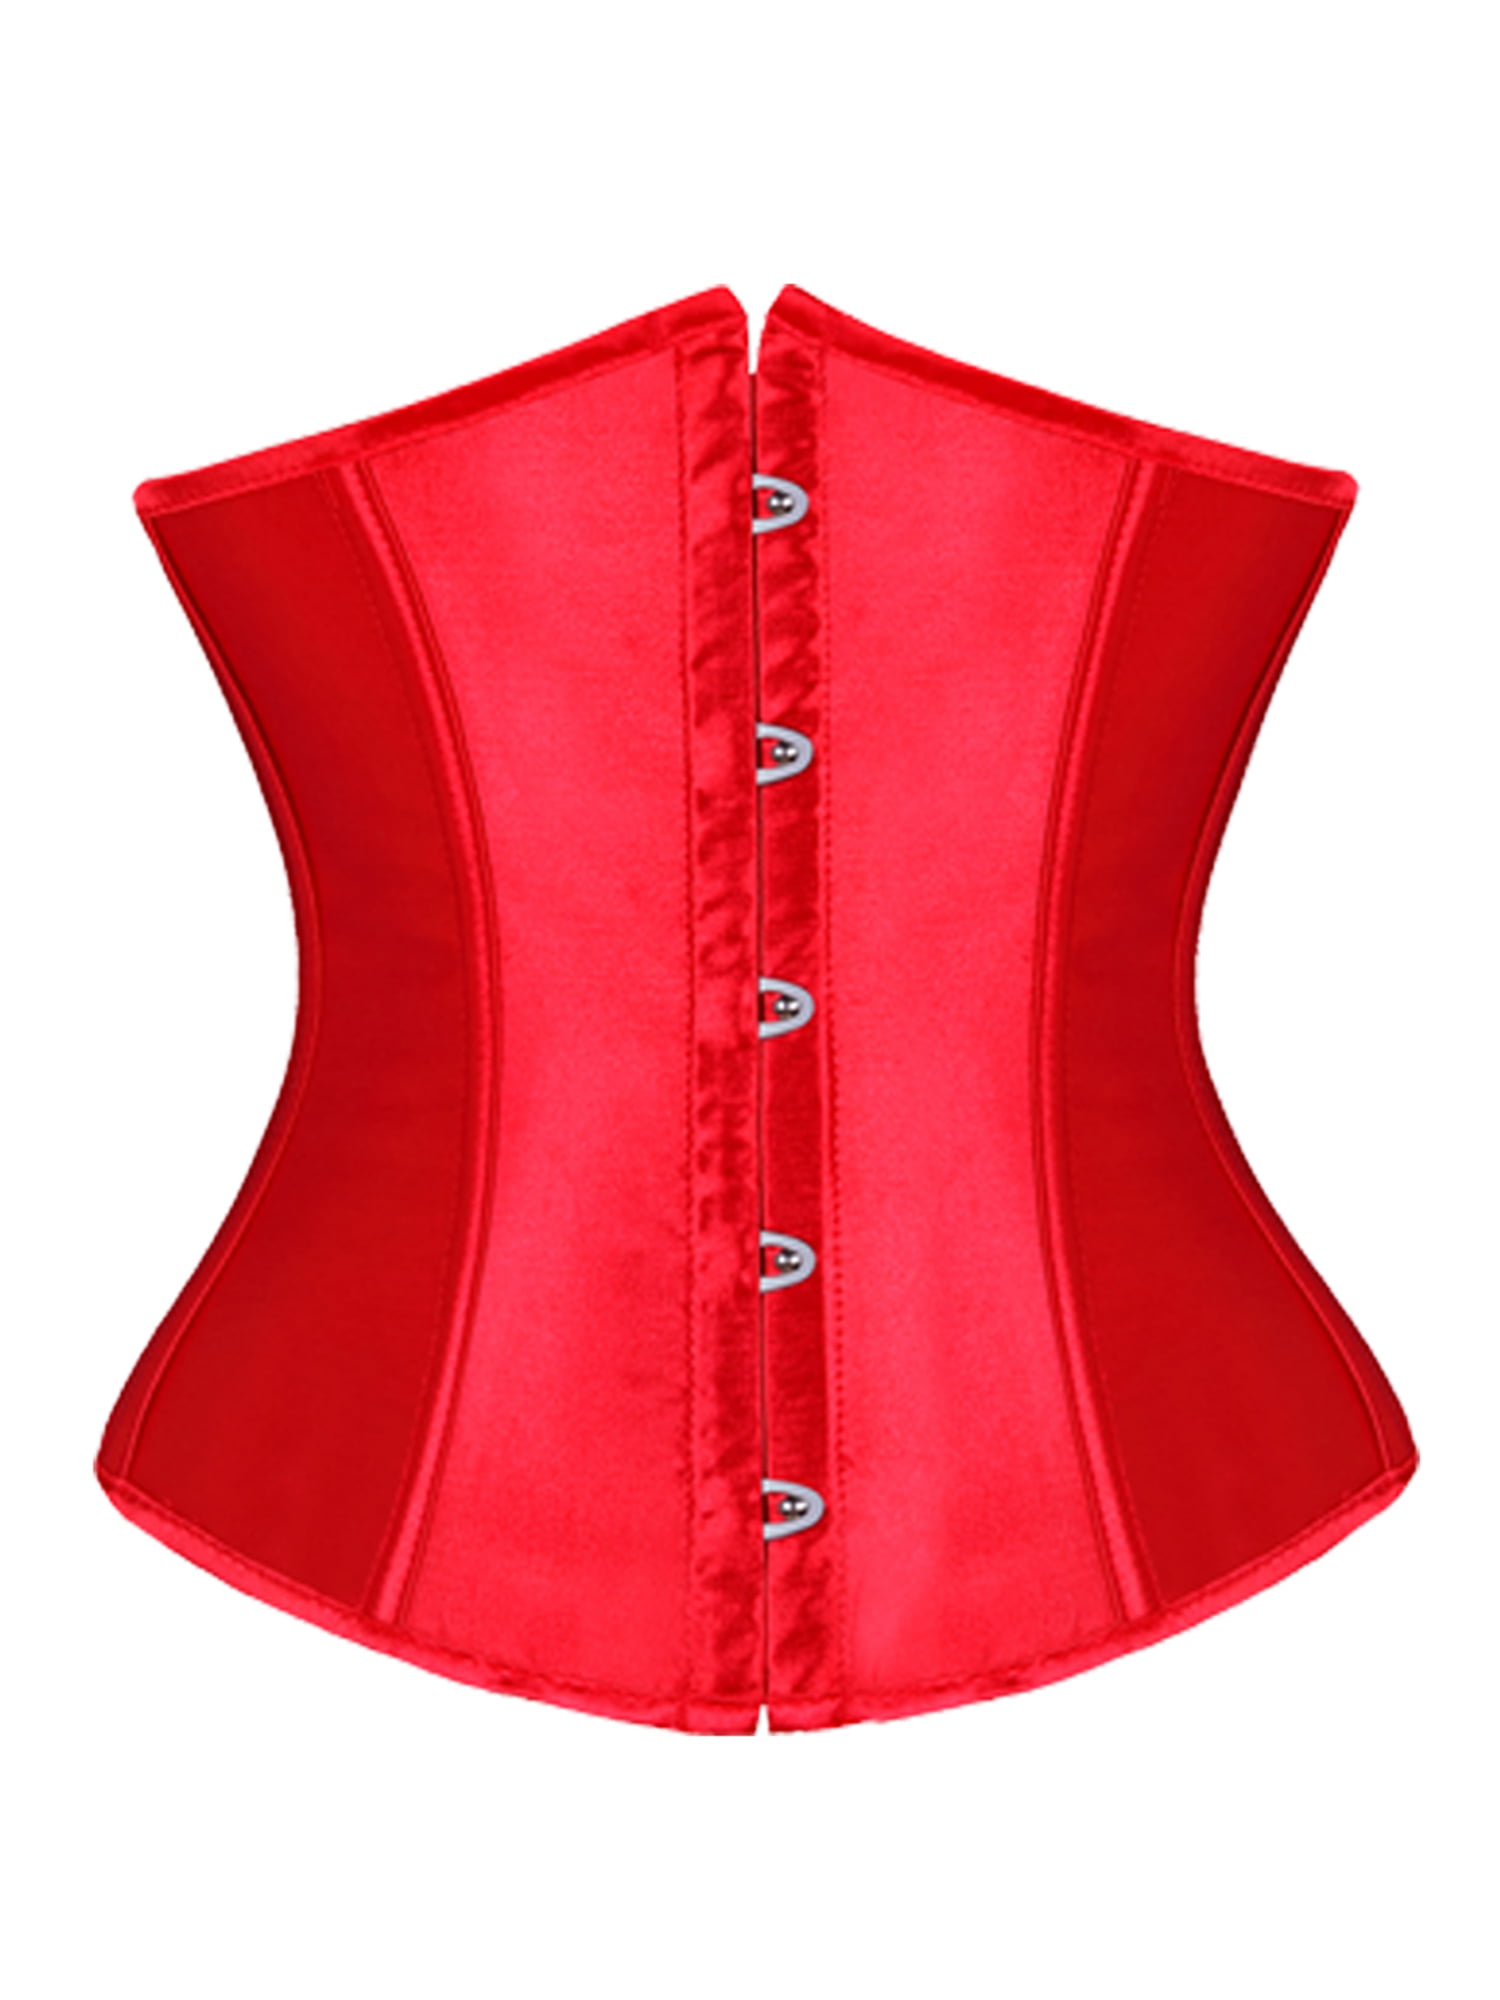 LELINTA Sexy Underbust Corset Lingerie Lace up Back Corset Bustier 12 Plastic Boned with G-String,Red S-2XL Walmart.com